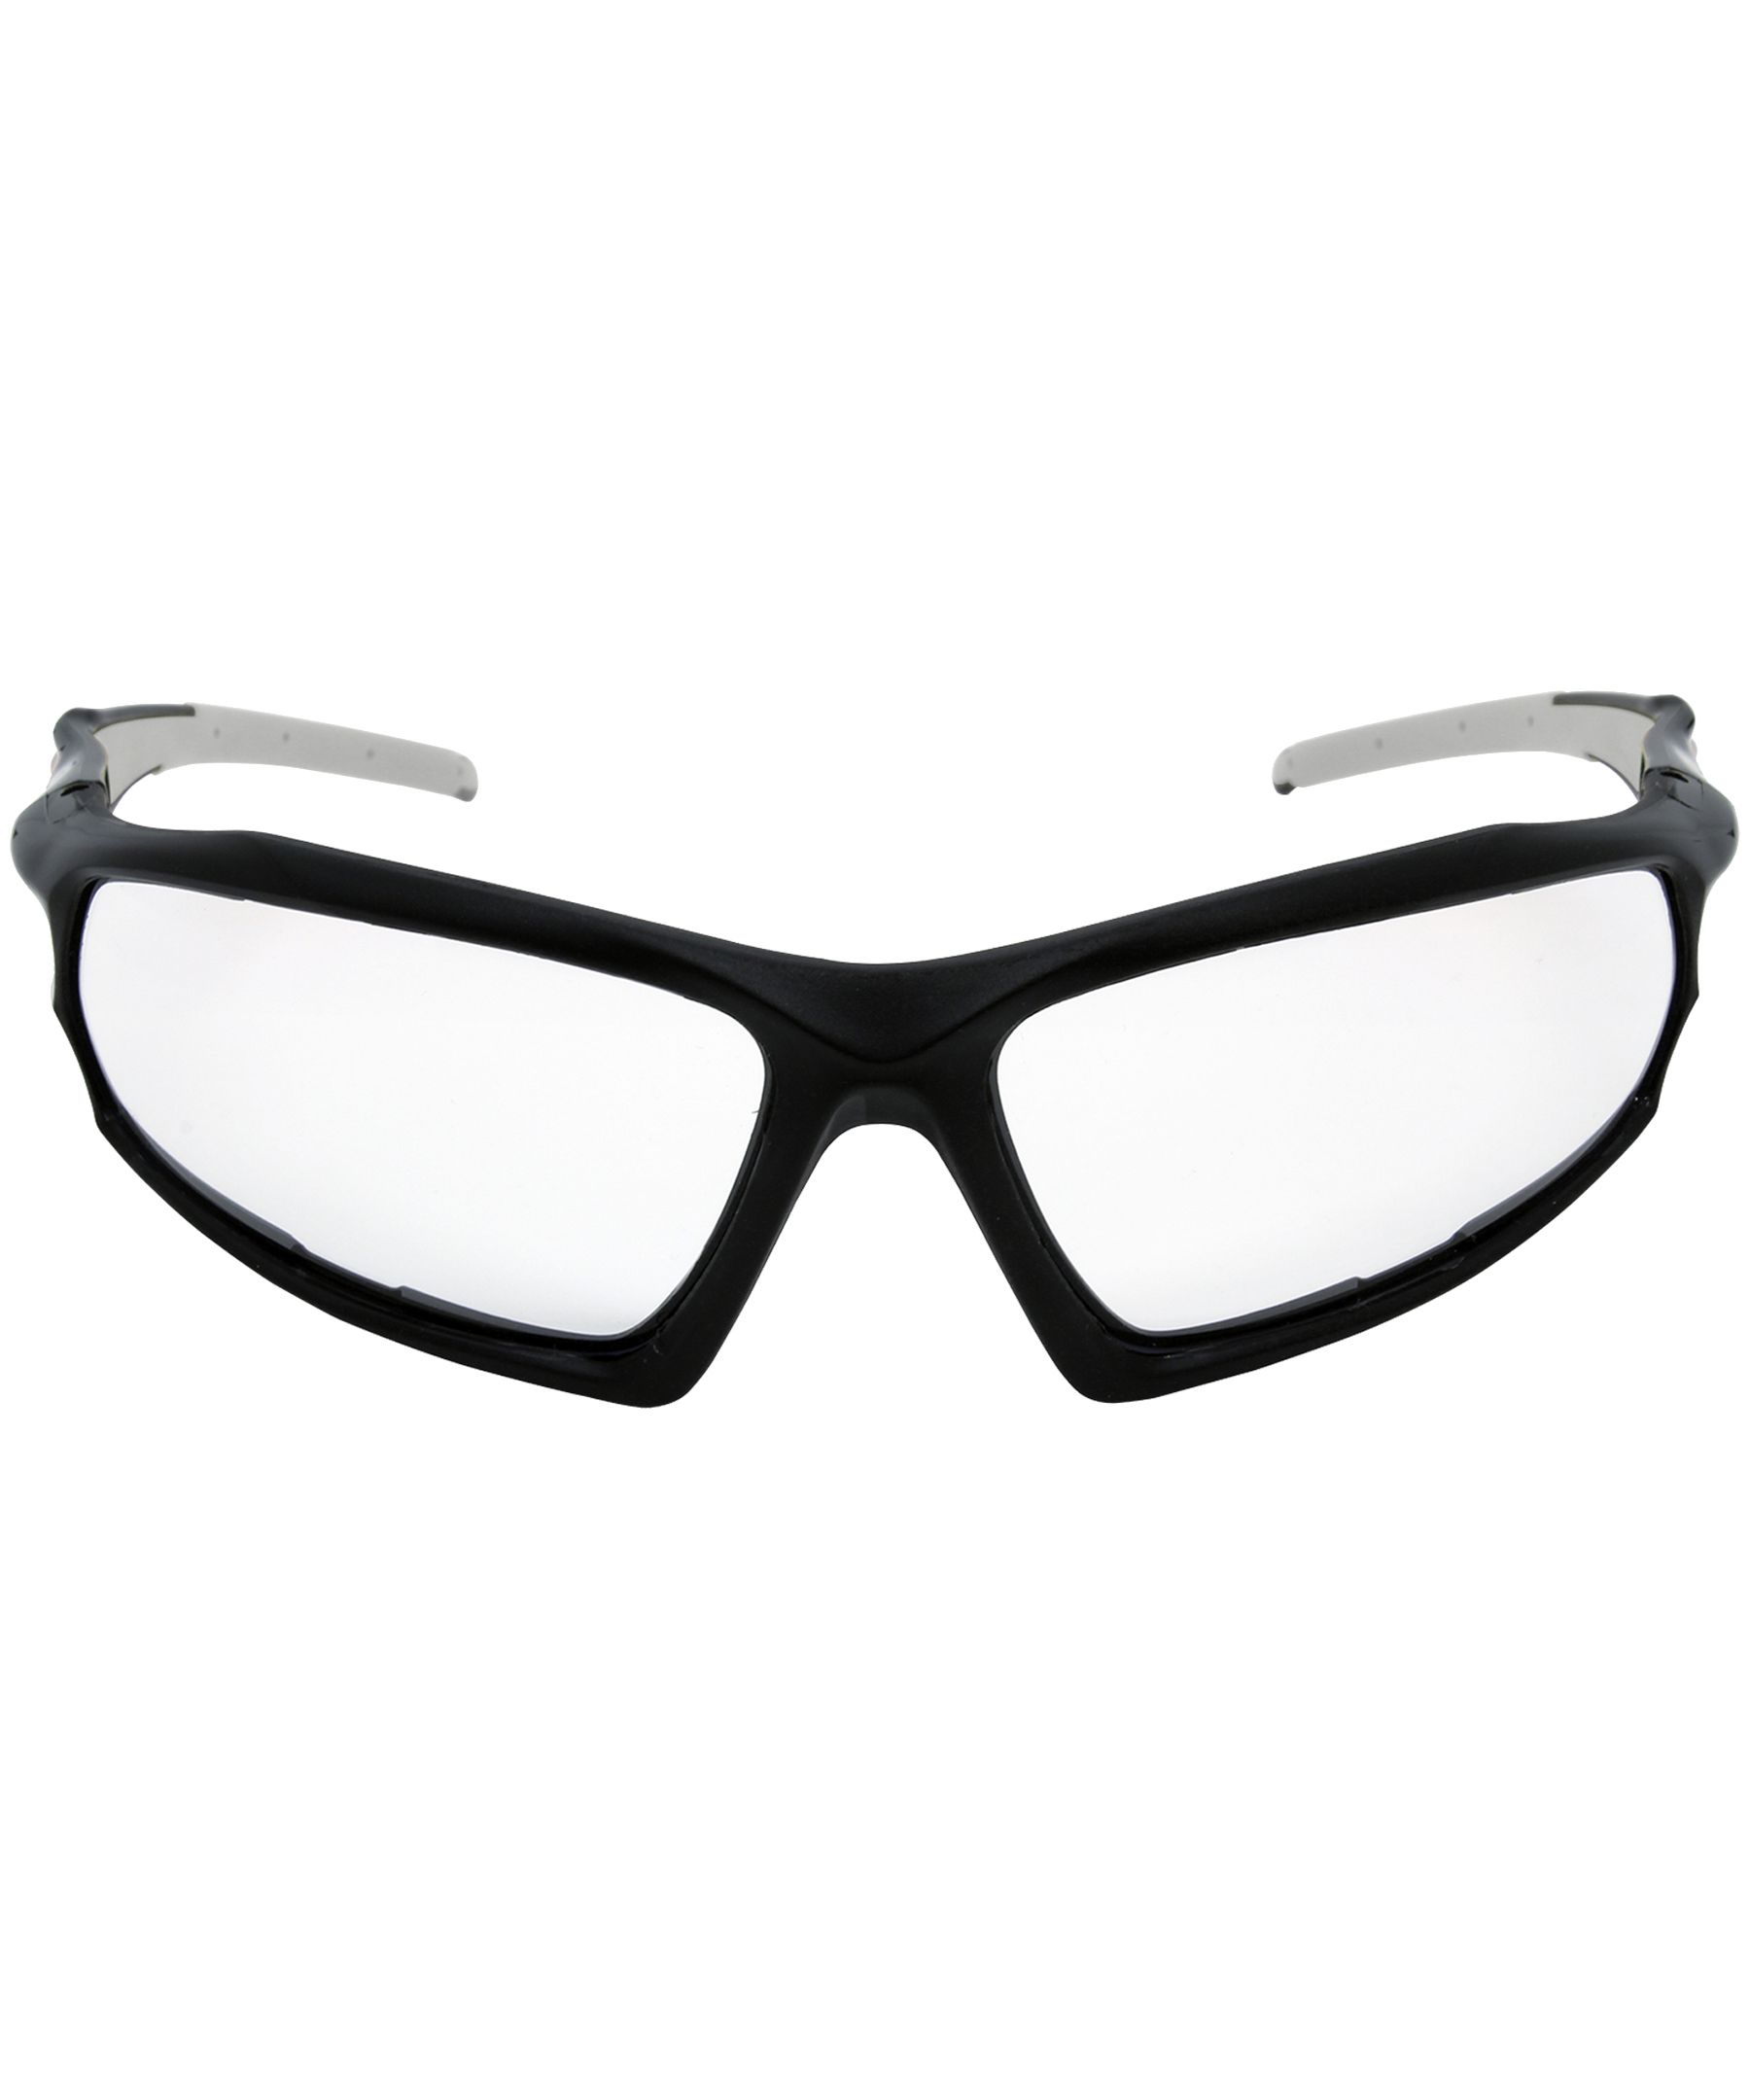 https://media-www.marks.com/product/marks-work-wearhouse/industrial-world/mens-accessories/410036344250/safety-glasses-dakota-indoor-outdoor-lens-cf6ddfda-ac04-49fe-9f85-e6599745c677-jpgrendition.jpg?imdensity=1&imwidth=640&impolicy=mZoom